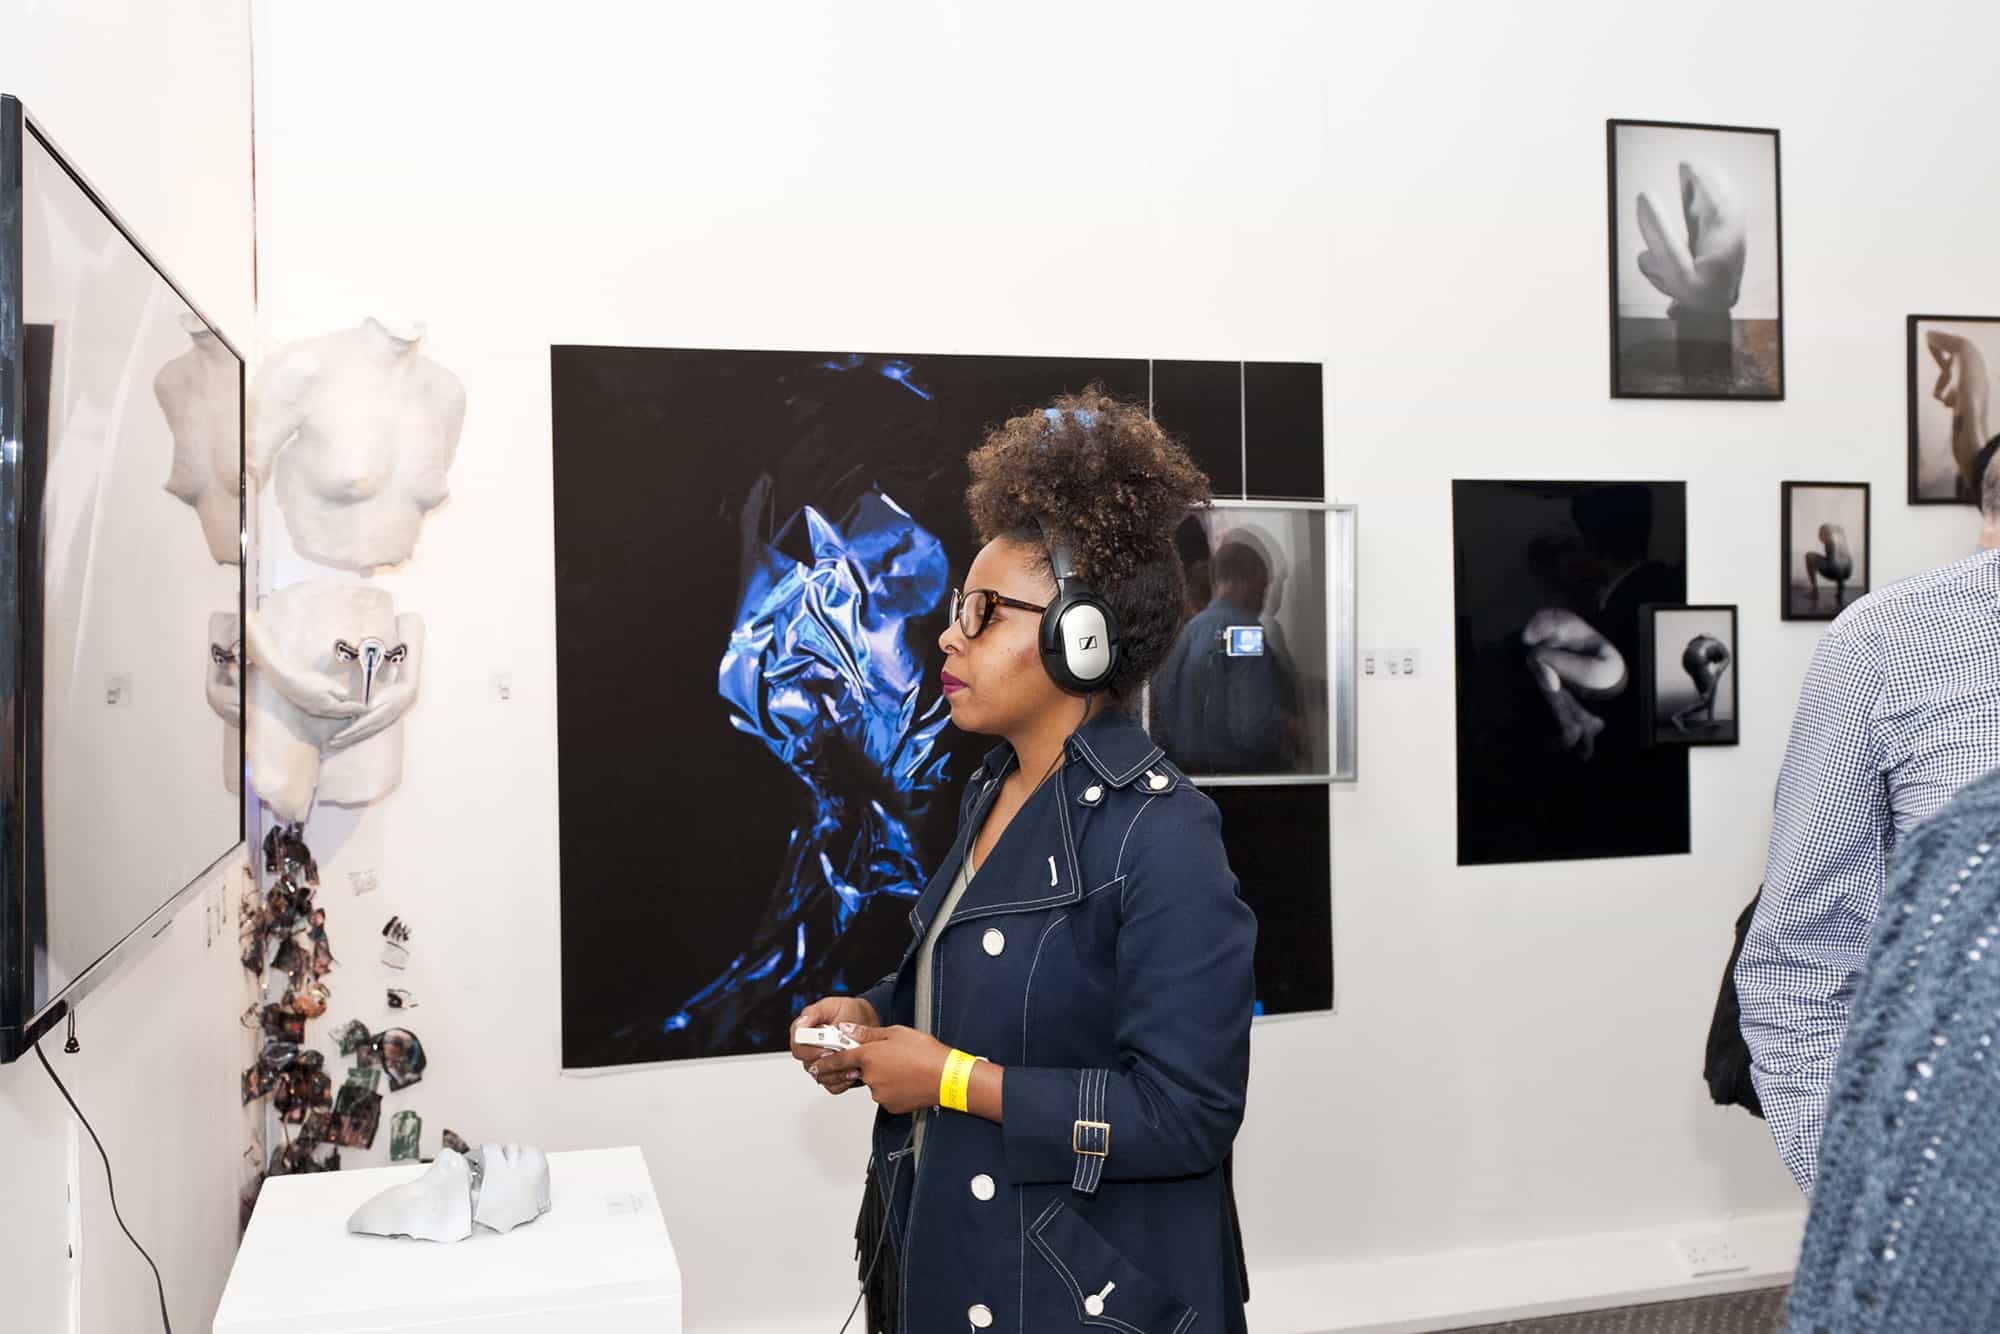 Ana Escobar, Girl with headphones at a private view, London College of Communication, UAL